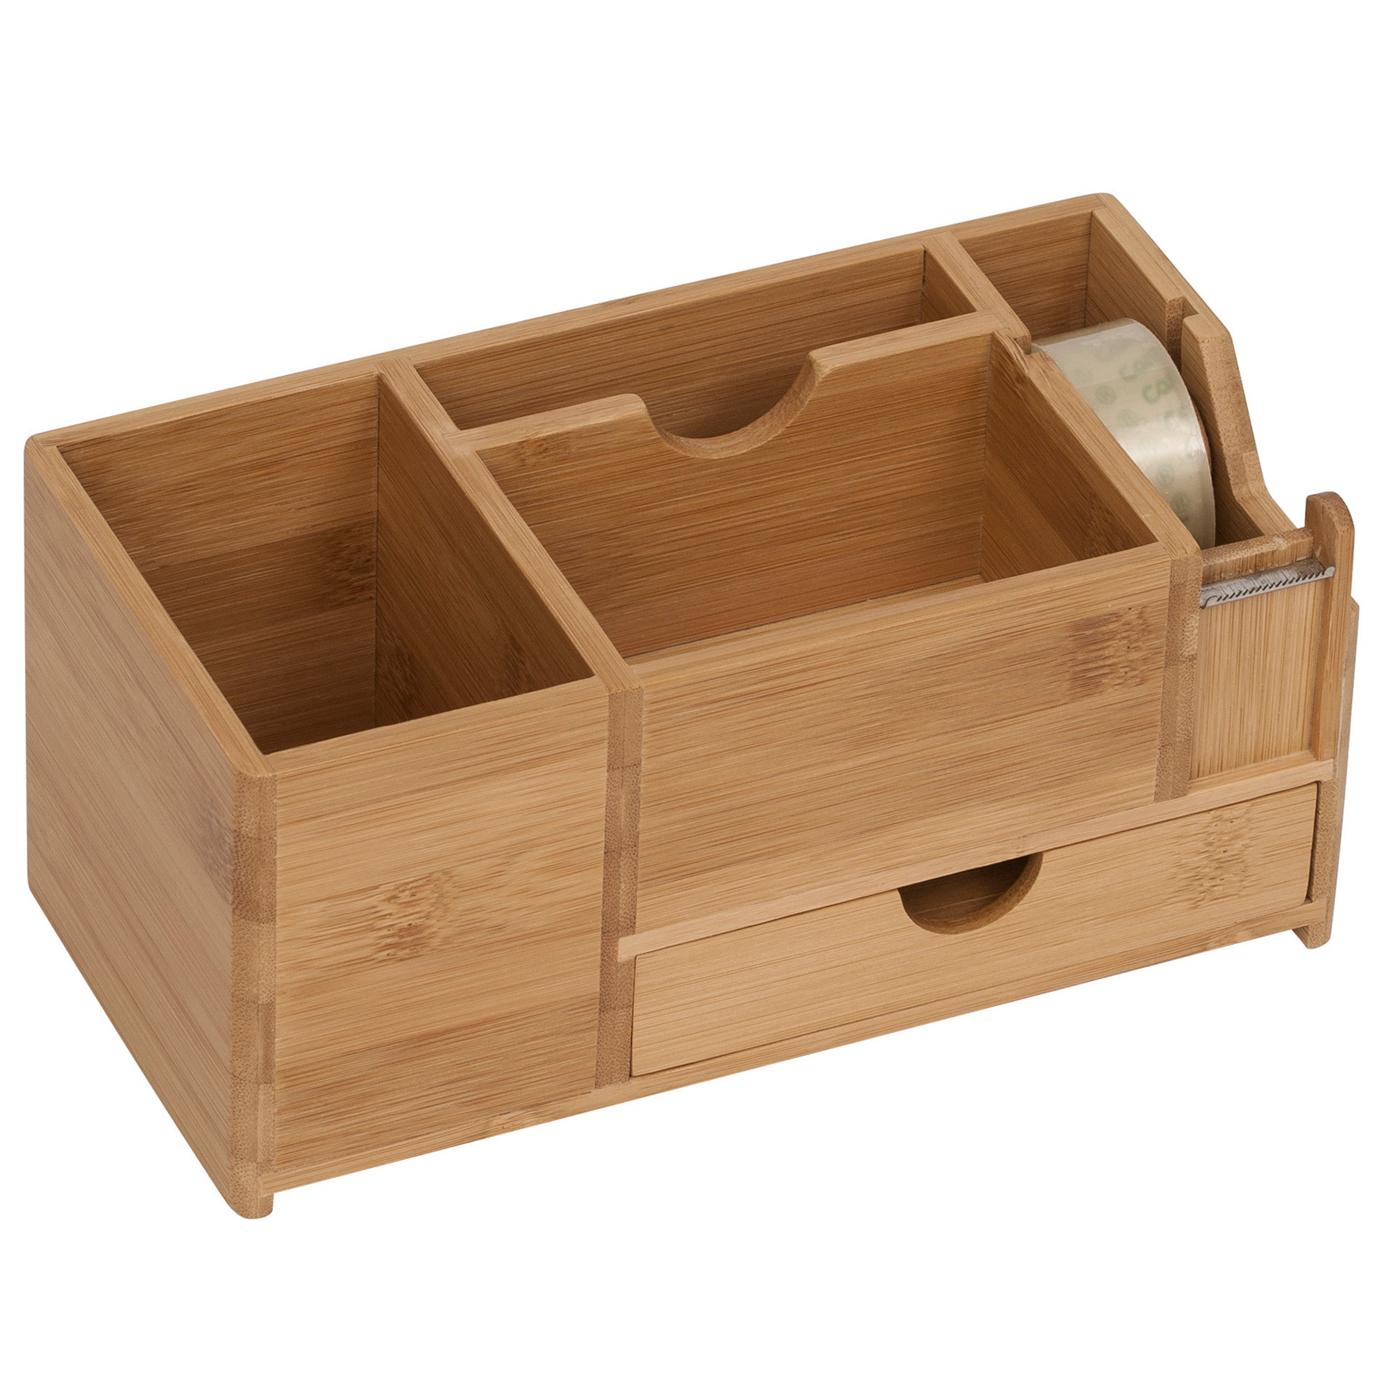 Merangue Bamboo Collection Desktop Holder with Drawer; image 1 of 2